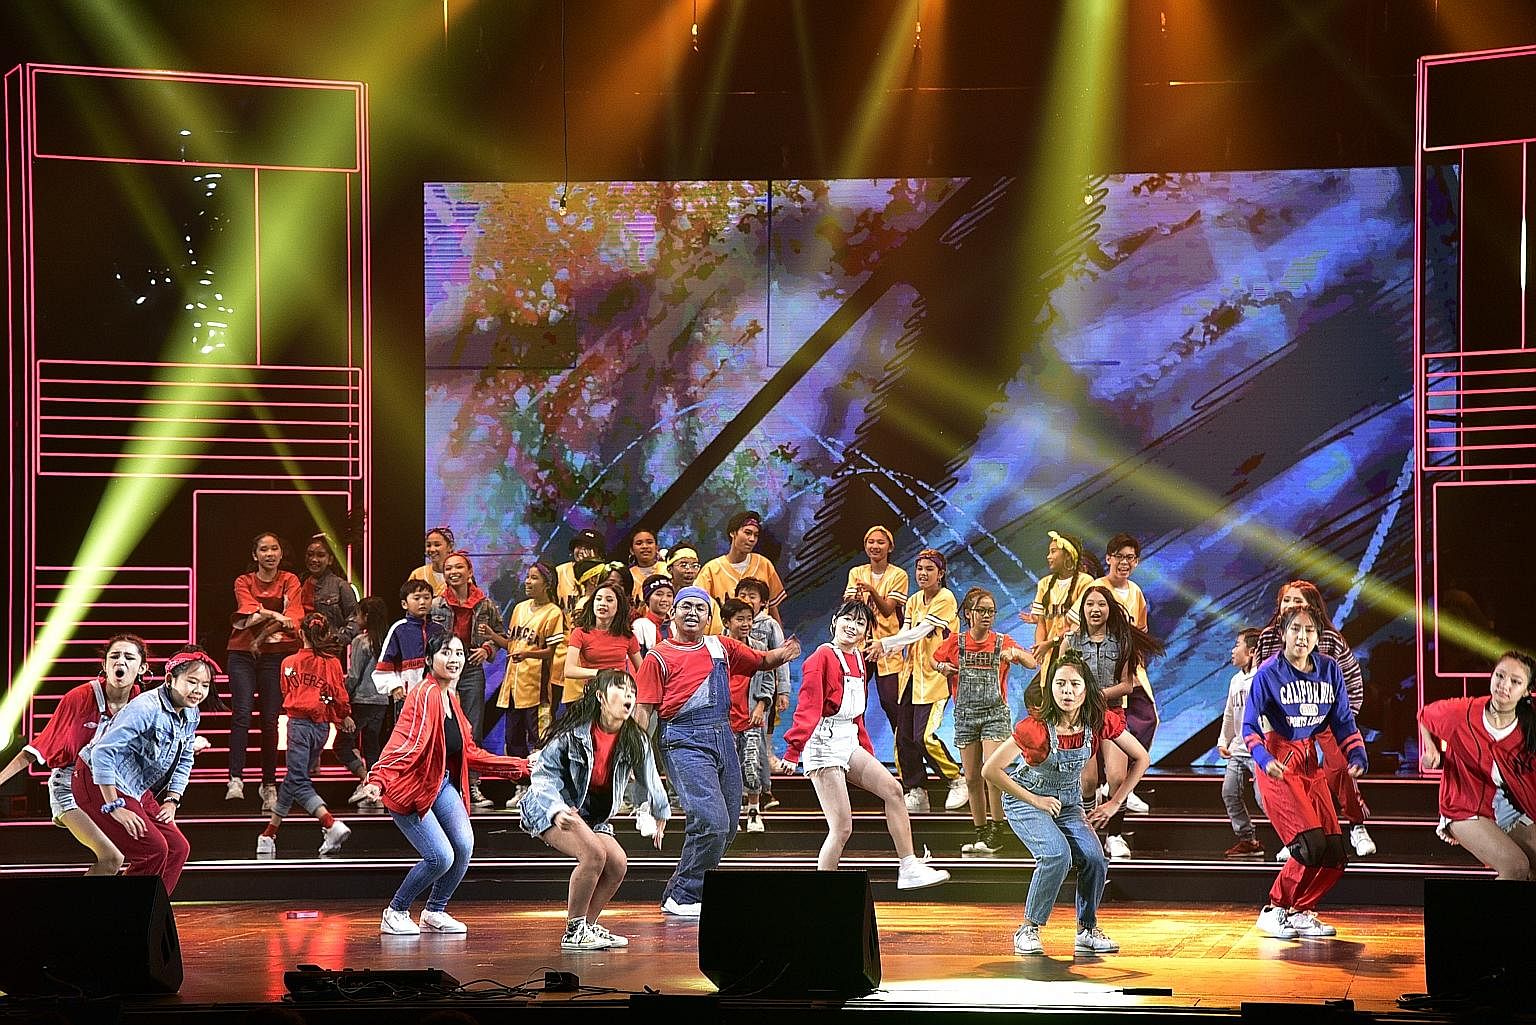 Above: Stylo Mylo and Danz People faced off in a hip-hop battle to a medley of hit songs during the opening night of ChildAid 2019.